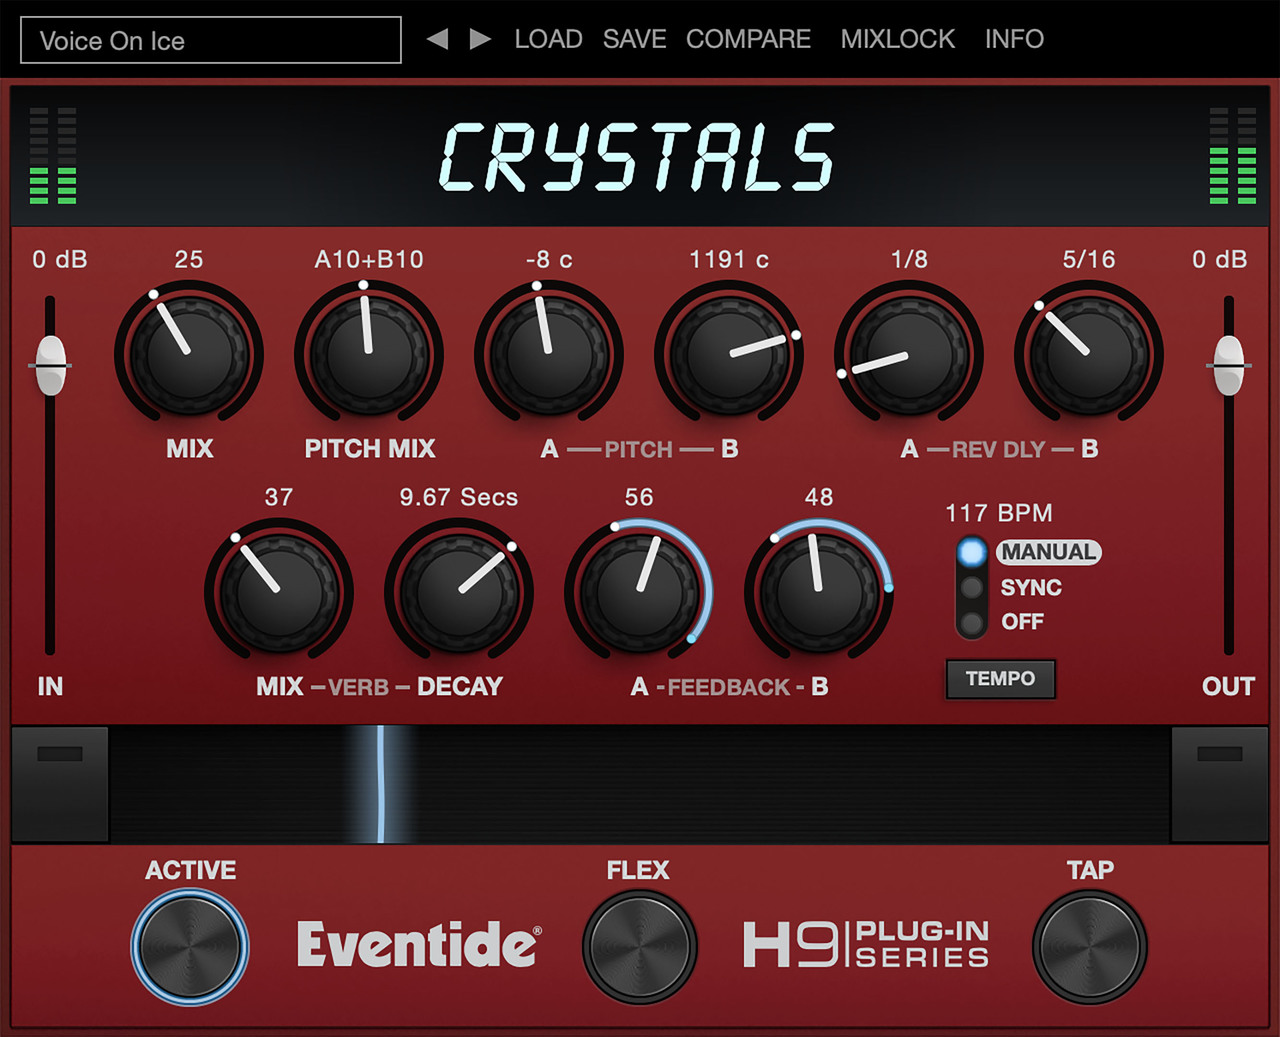 New Gear Alert: Crystals by Eventide, Focusrite Adds iPad Support, Waves + Mix With The Masters Partnership, & More